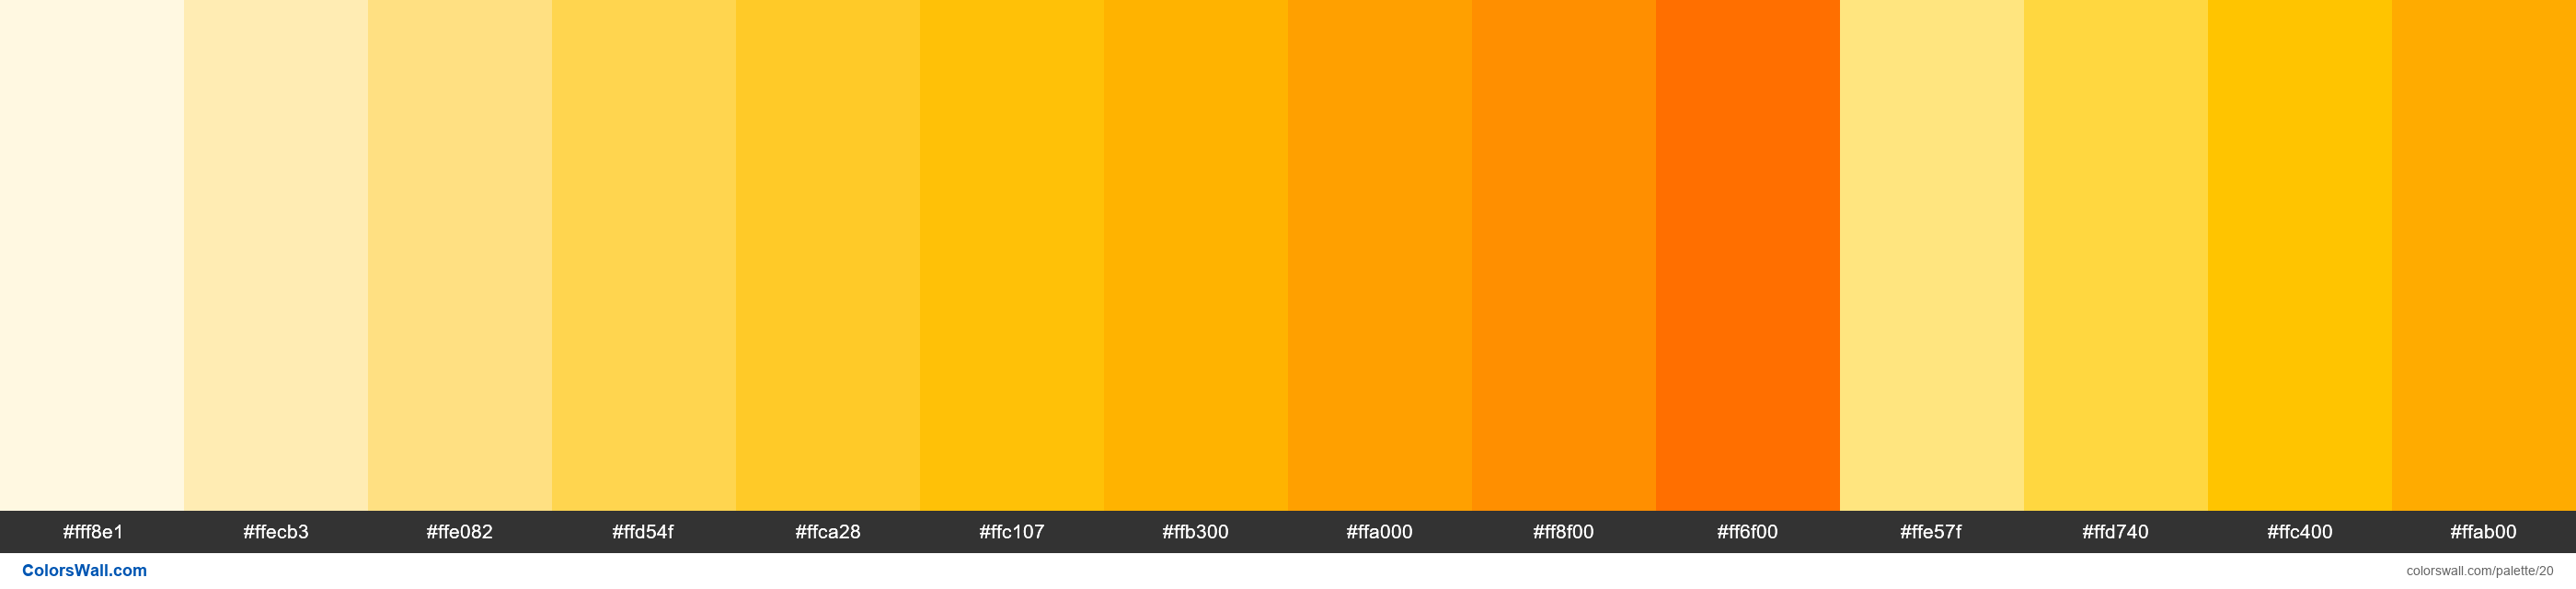 Amber palette Materialize CSS - #20